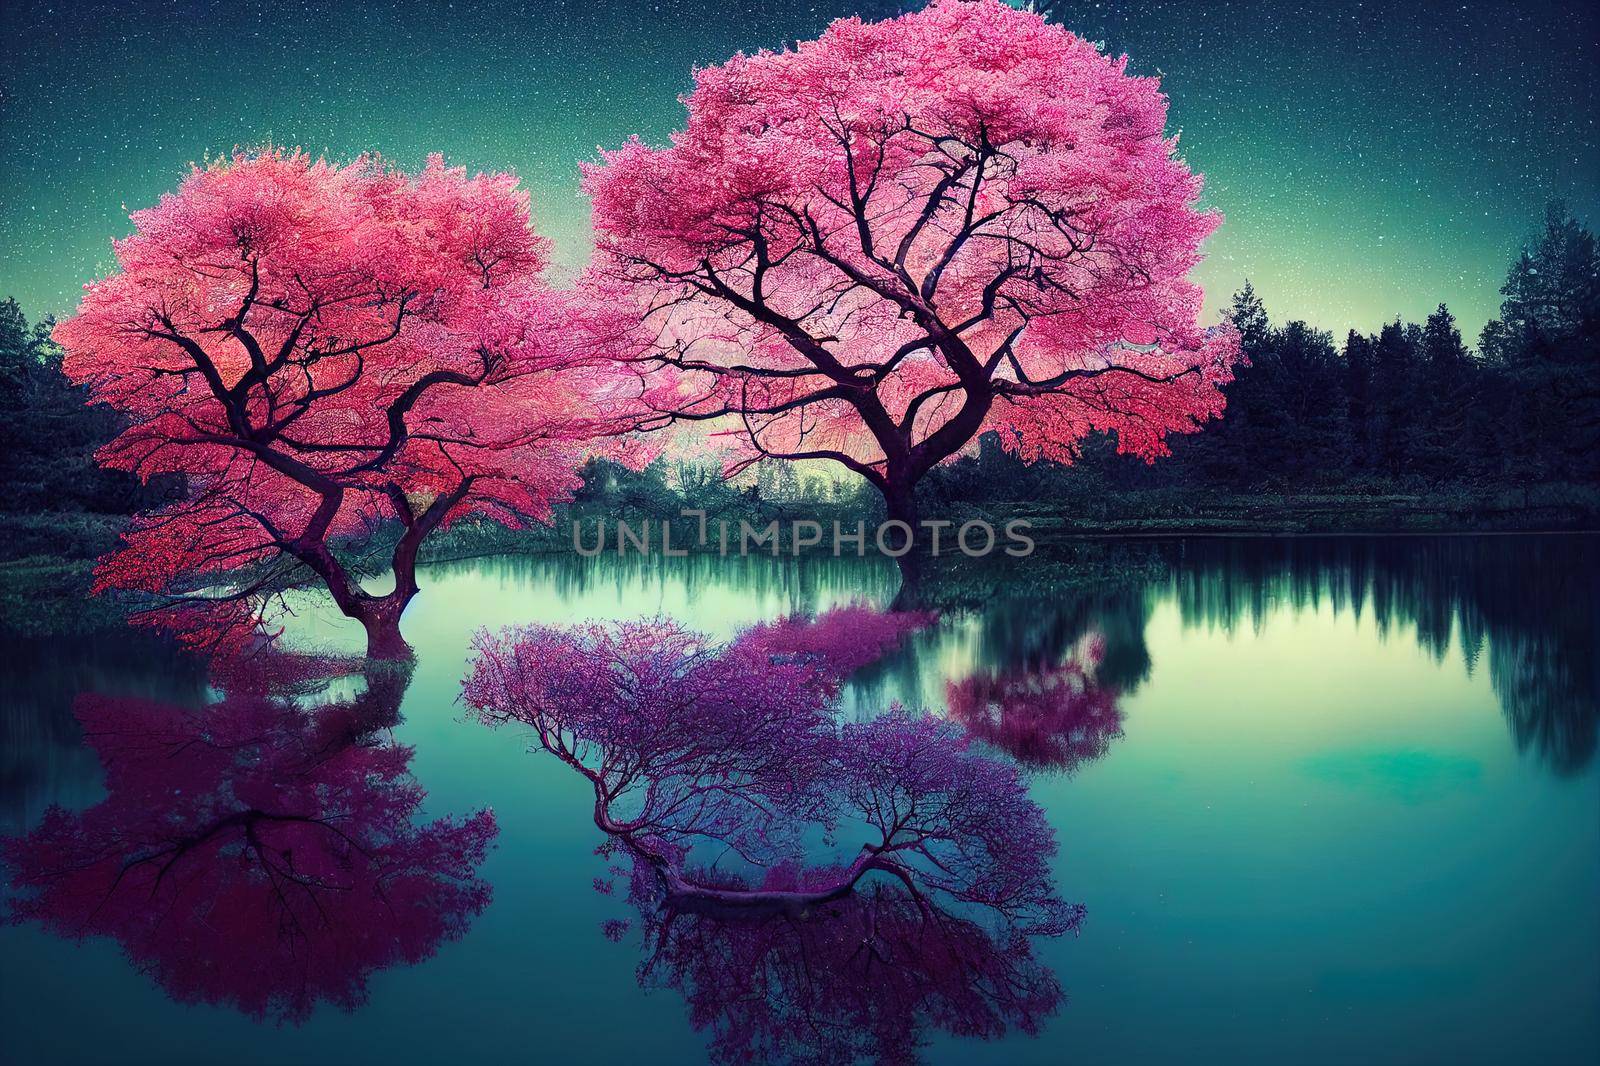 Pink tree and pond in the forest at night. by 2ragon